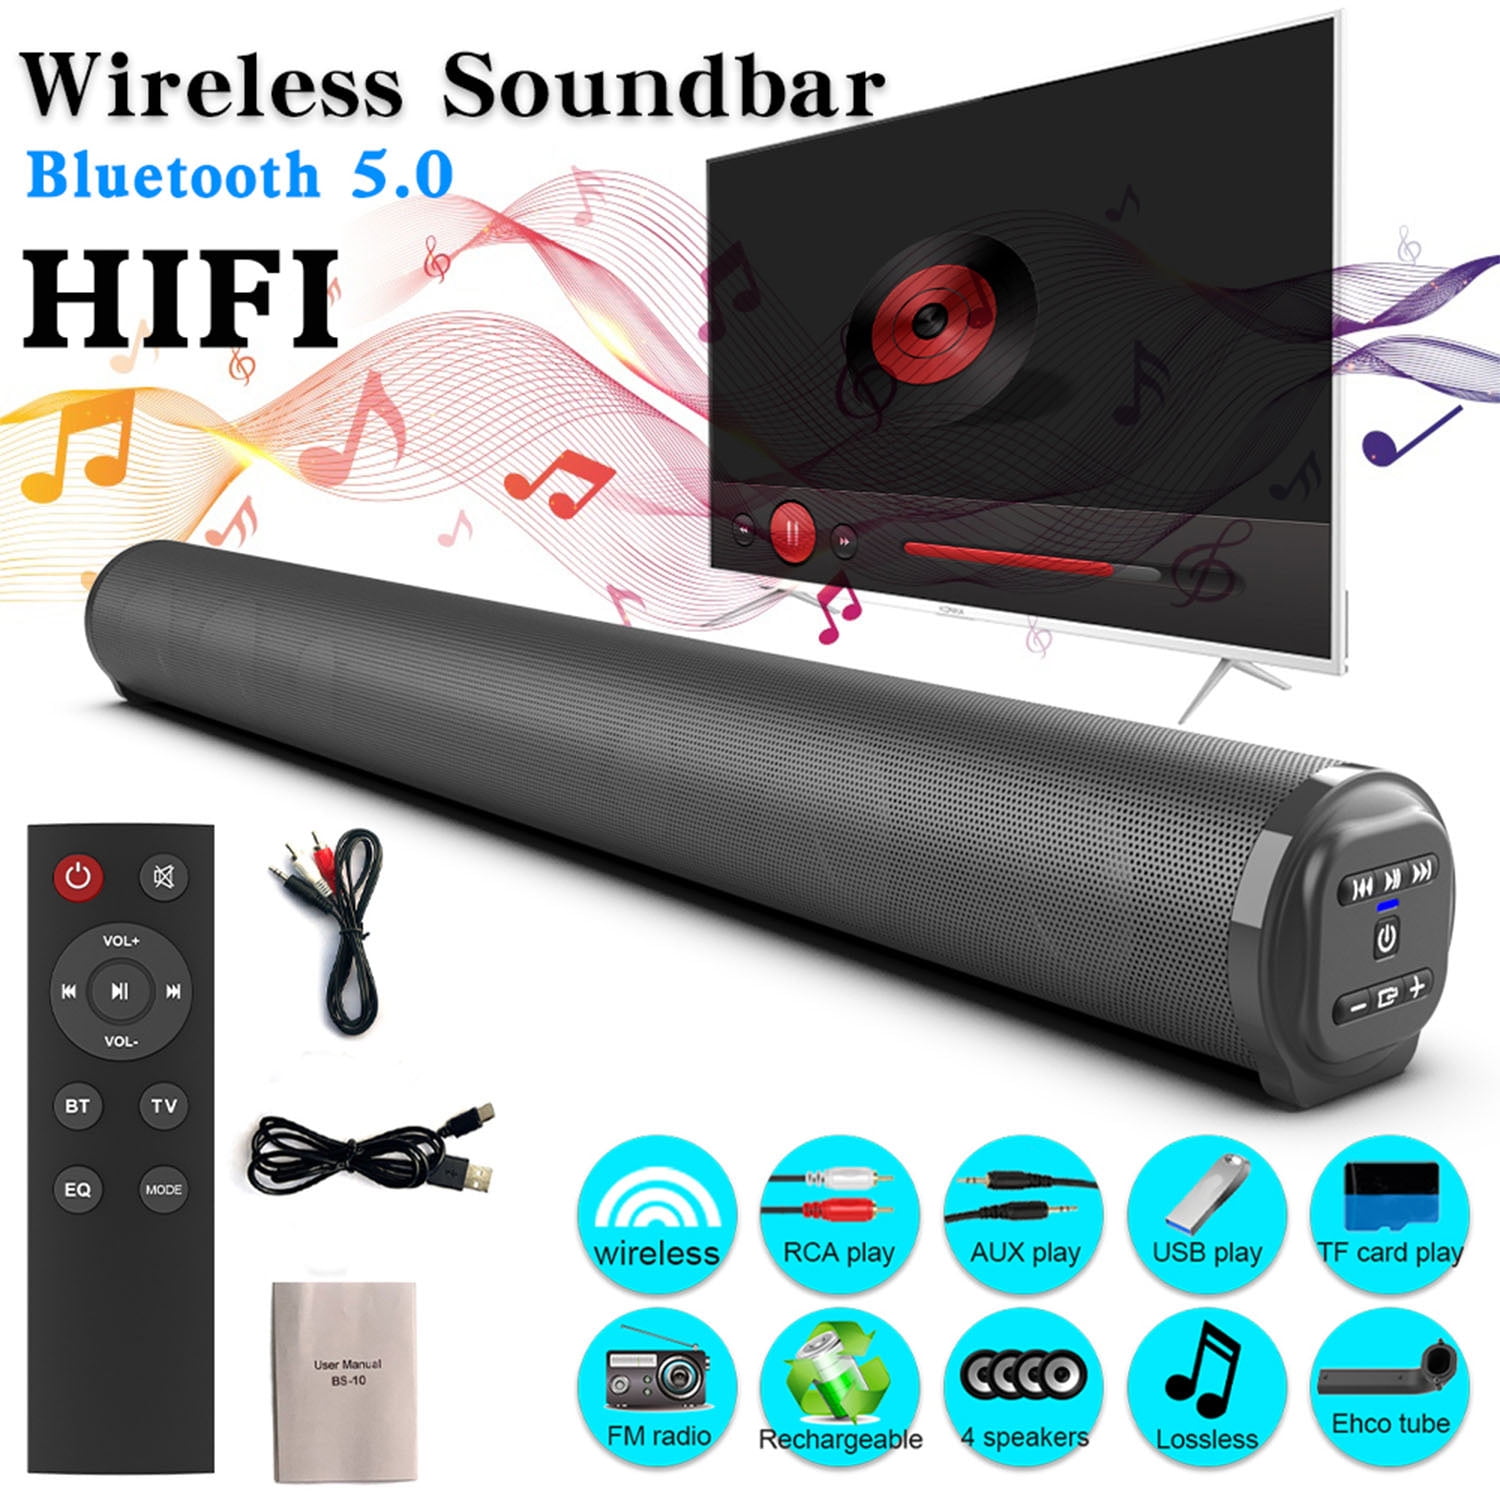 6. Connecting Soundbar and Subwoofer to Power